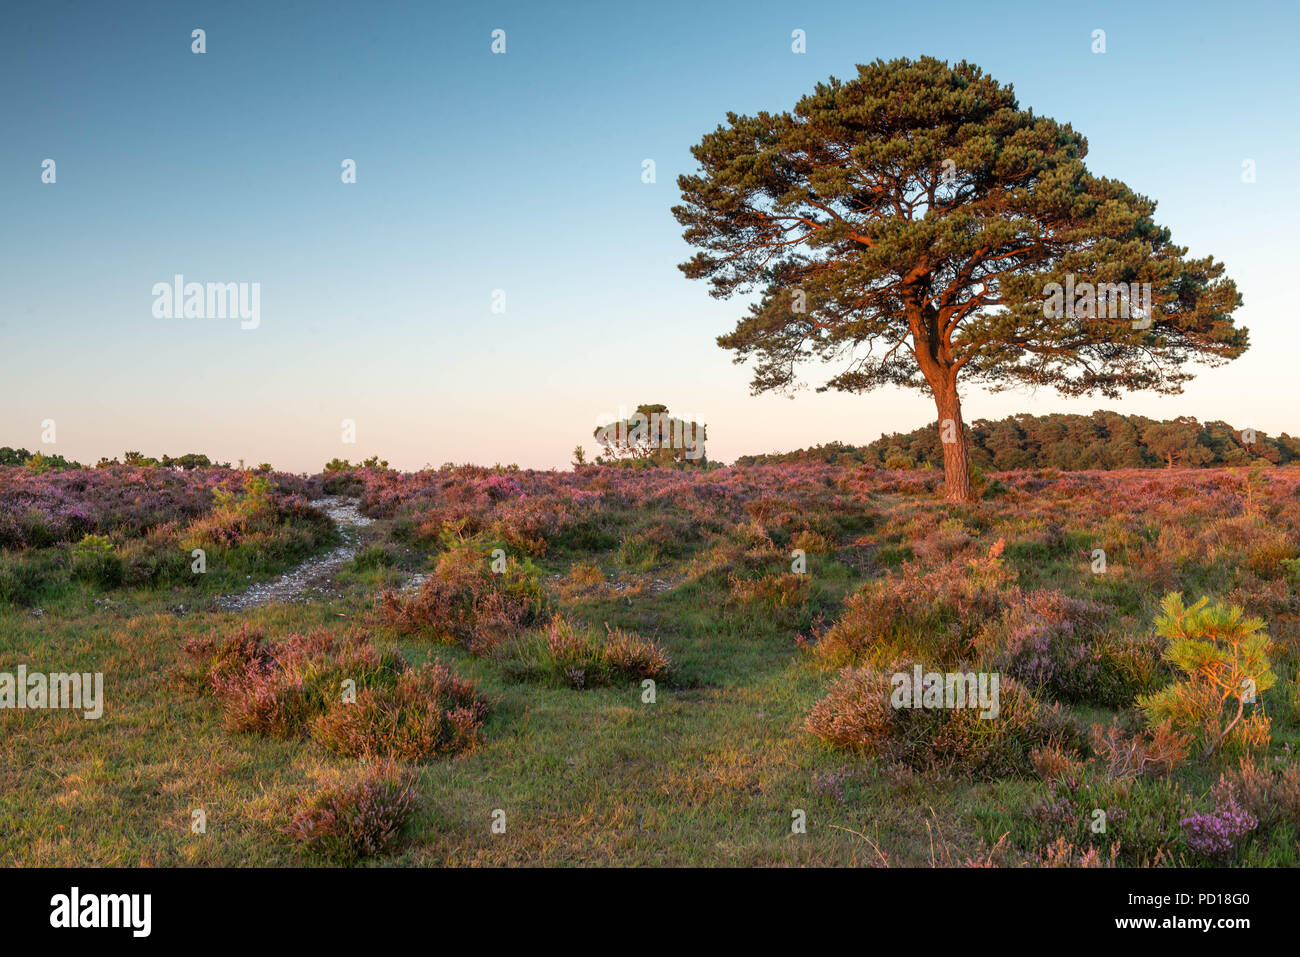 The trees and heathland of the New Forest National Park help provide a beautiful landscape from which to explore further. Taken near the village of Br Stock Photo